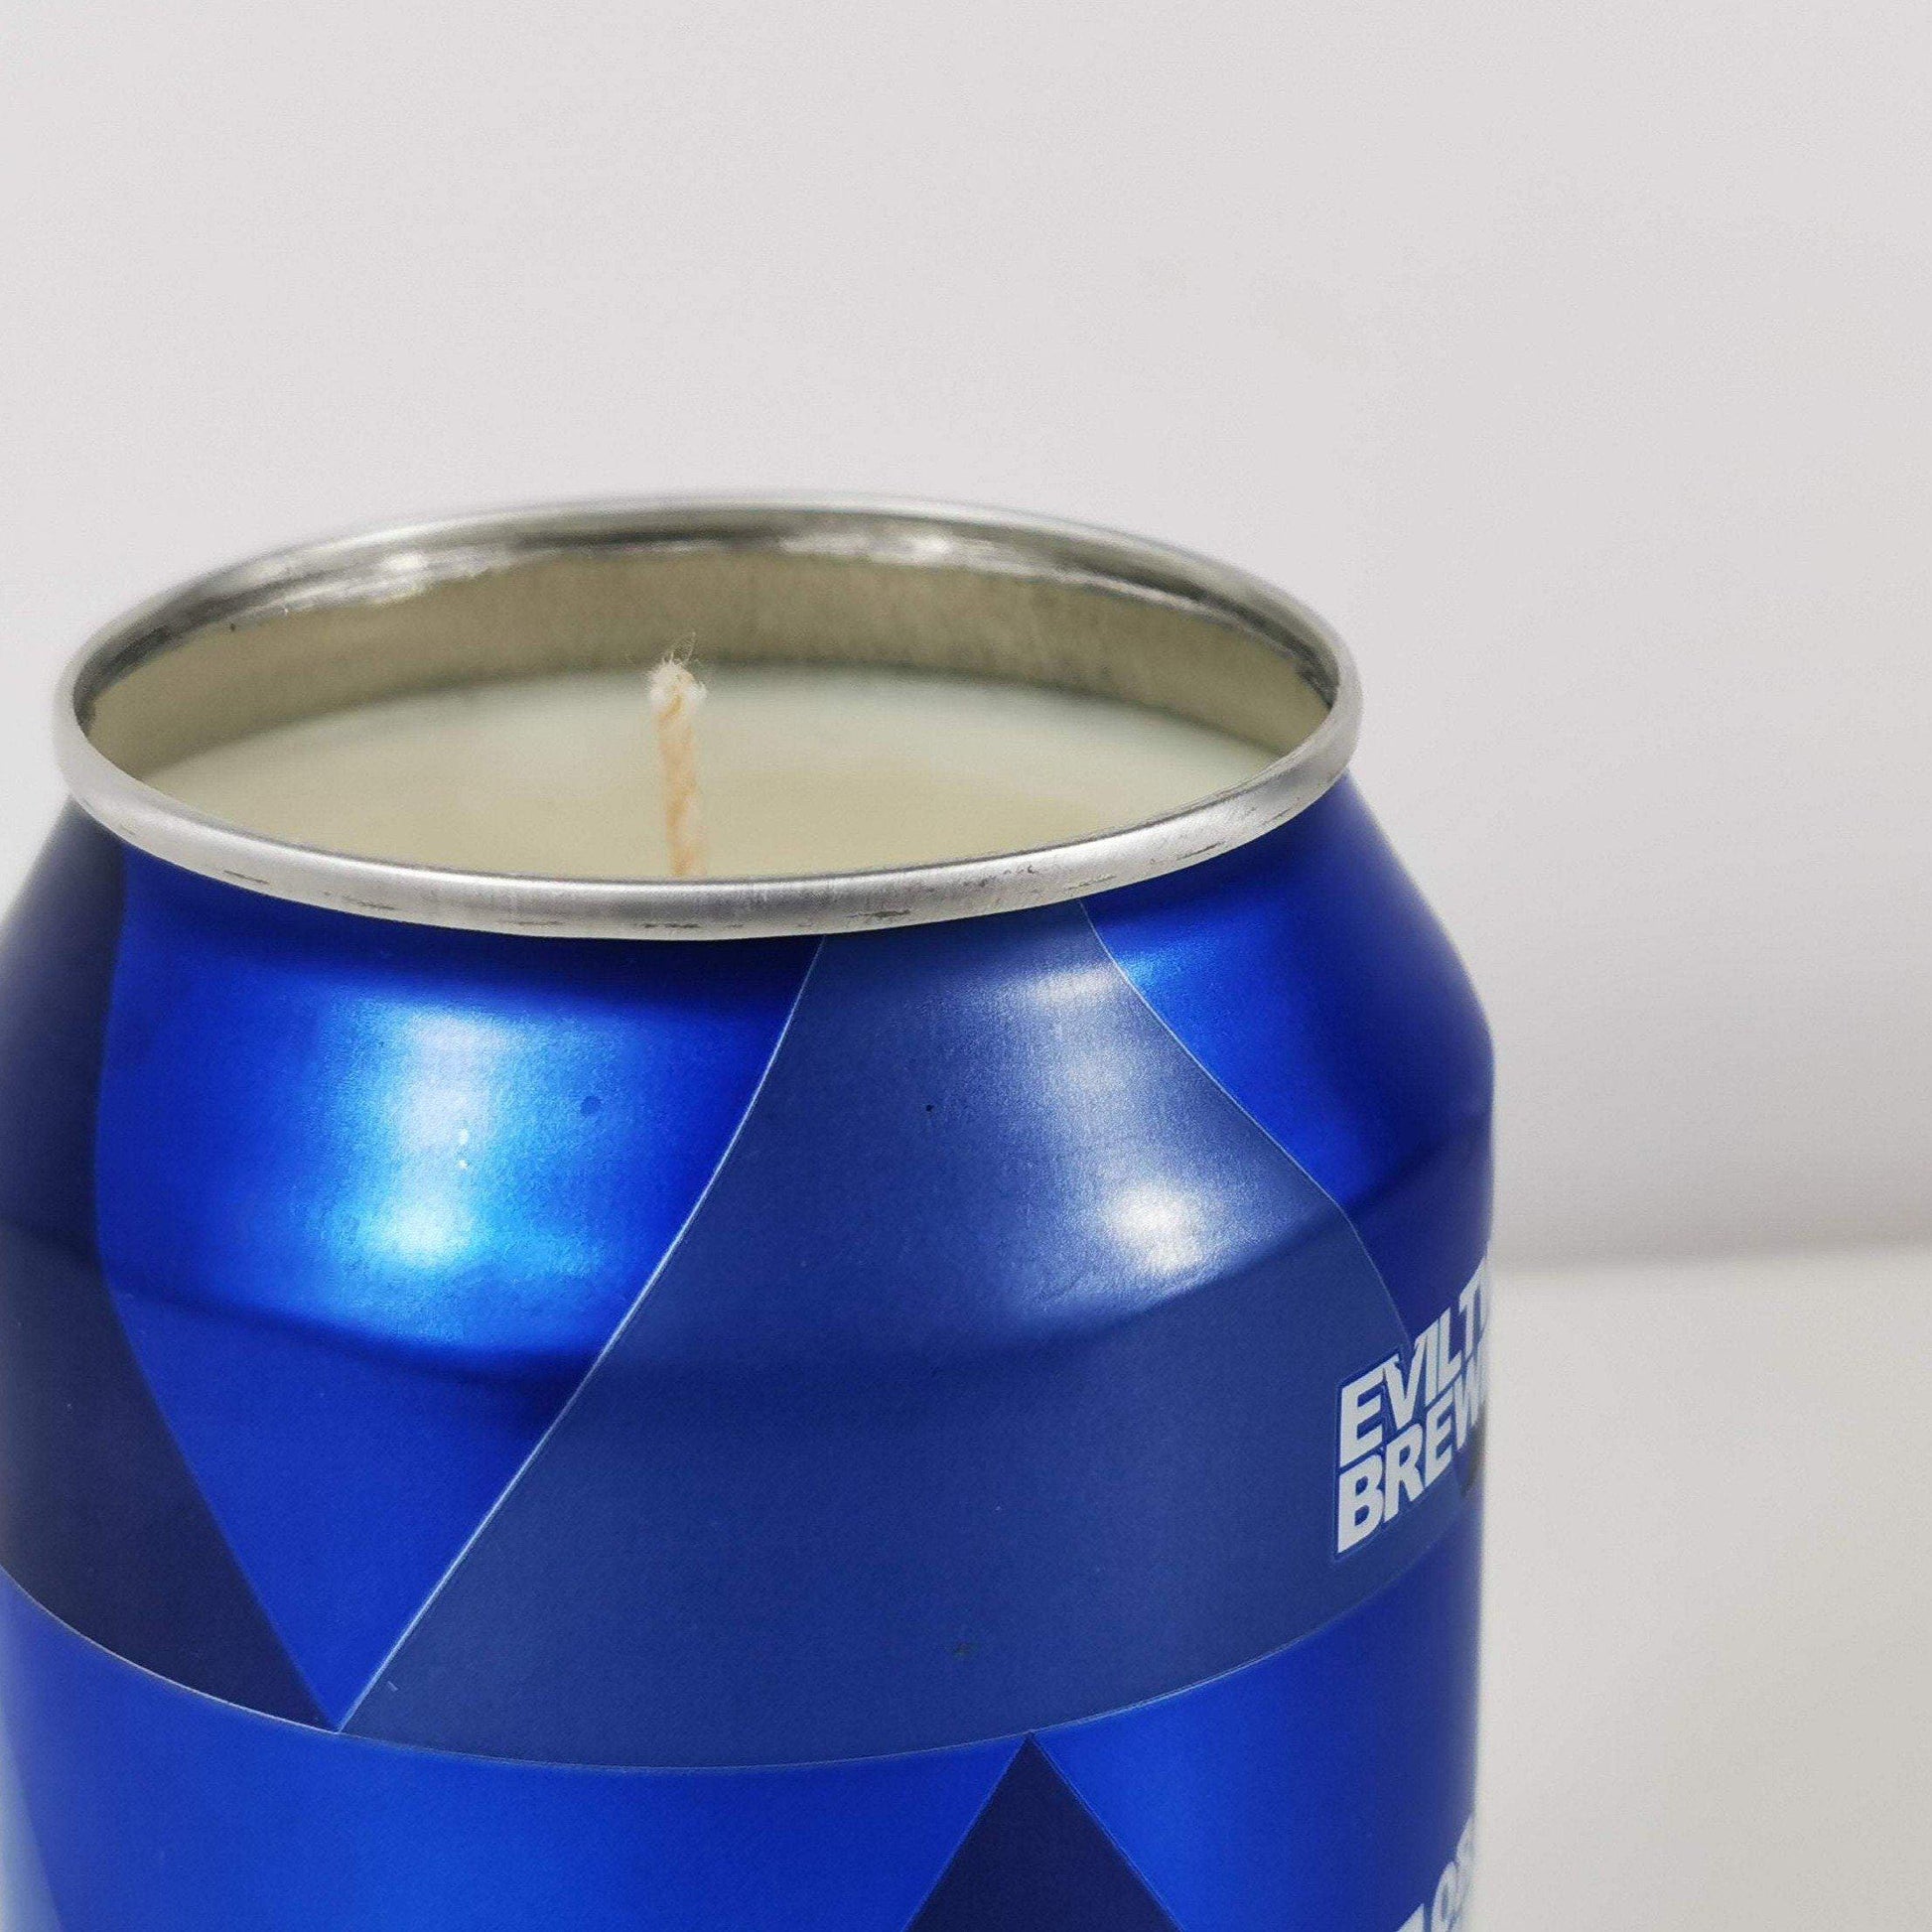 More Or Less Evil Pale Ale Craft Beer Can Candle-Beer Can Candles-Adhock Homeware